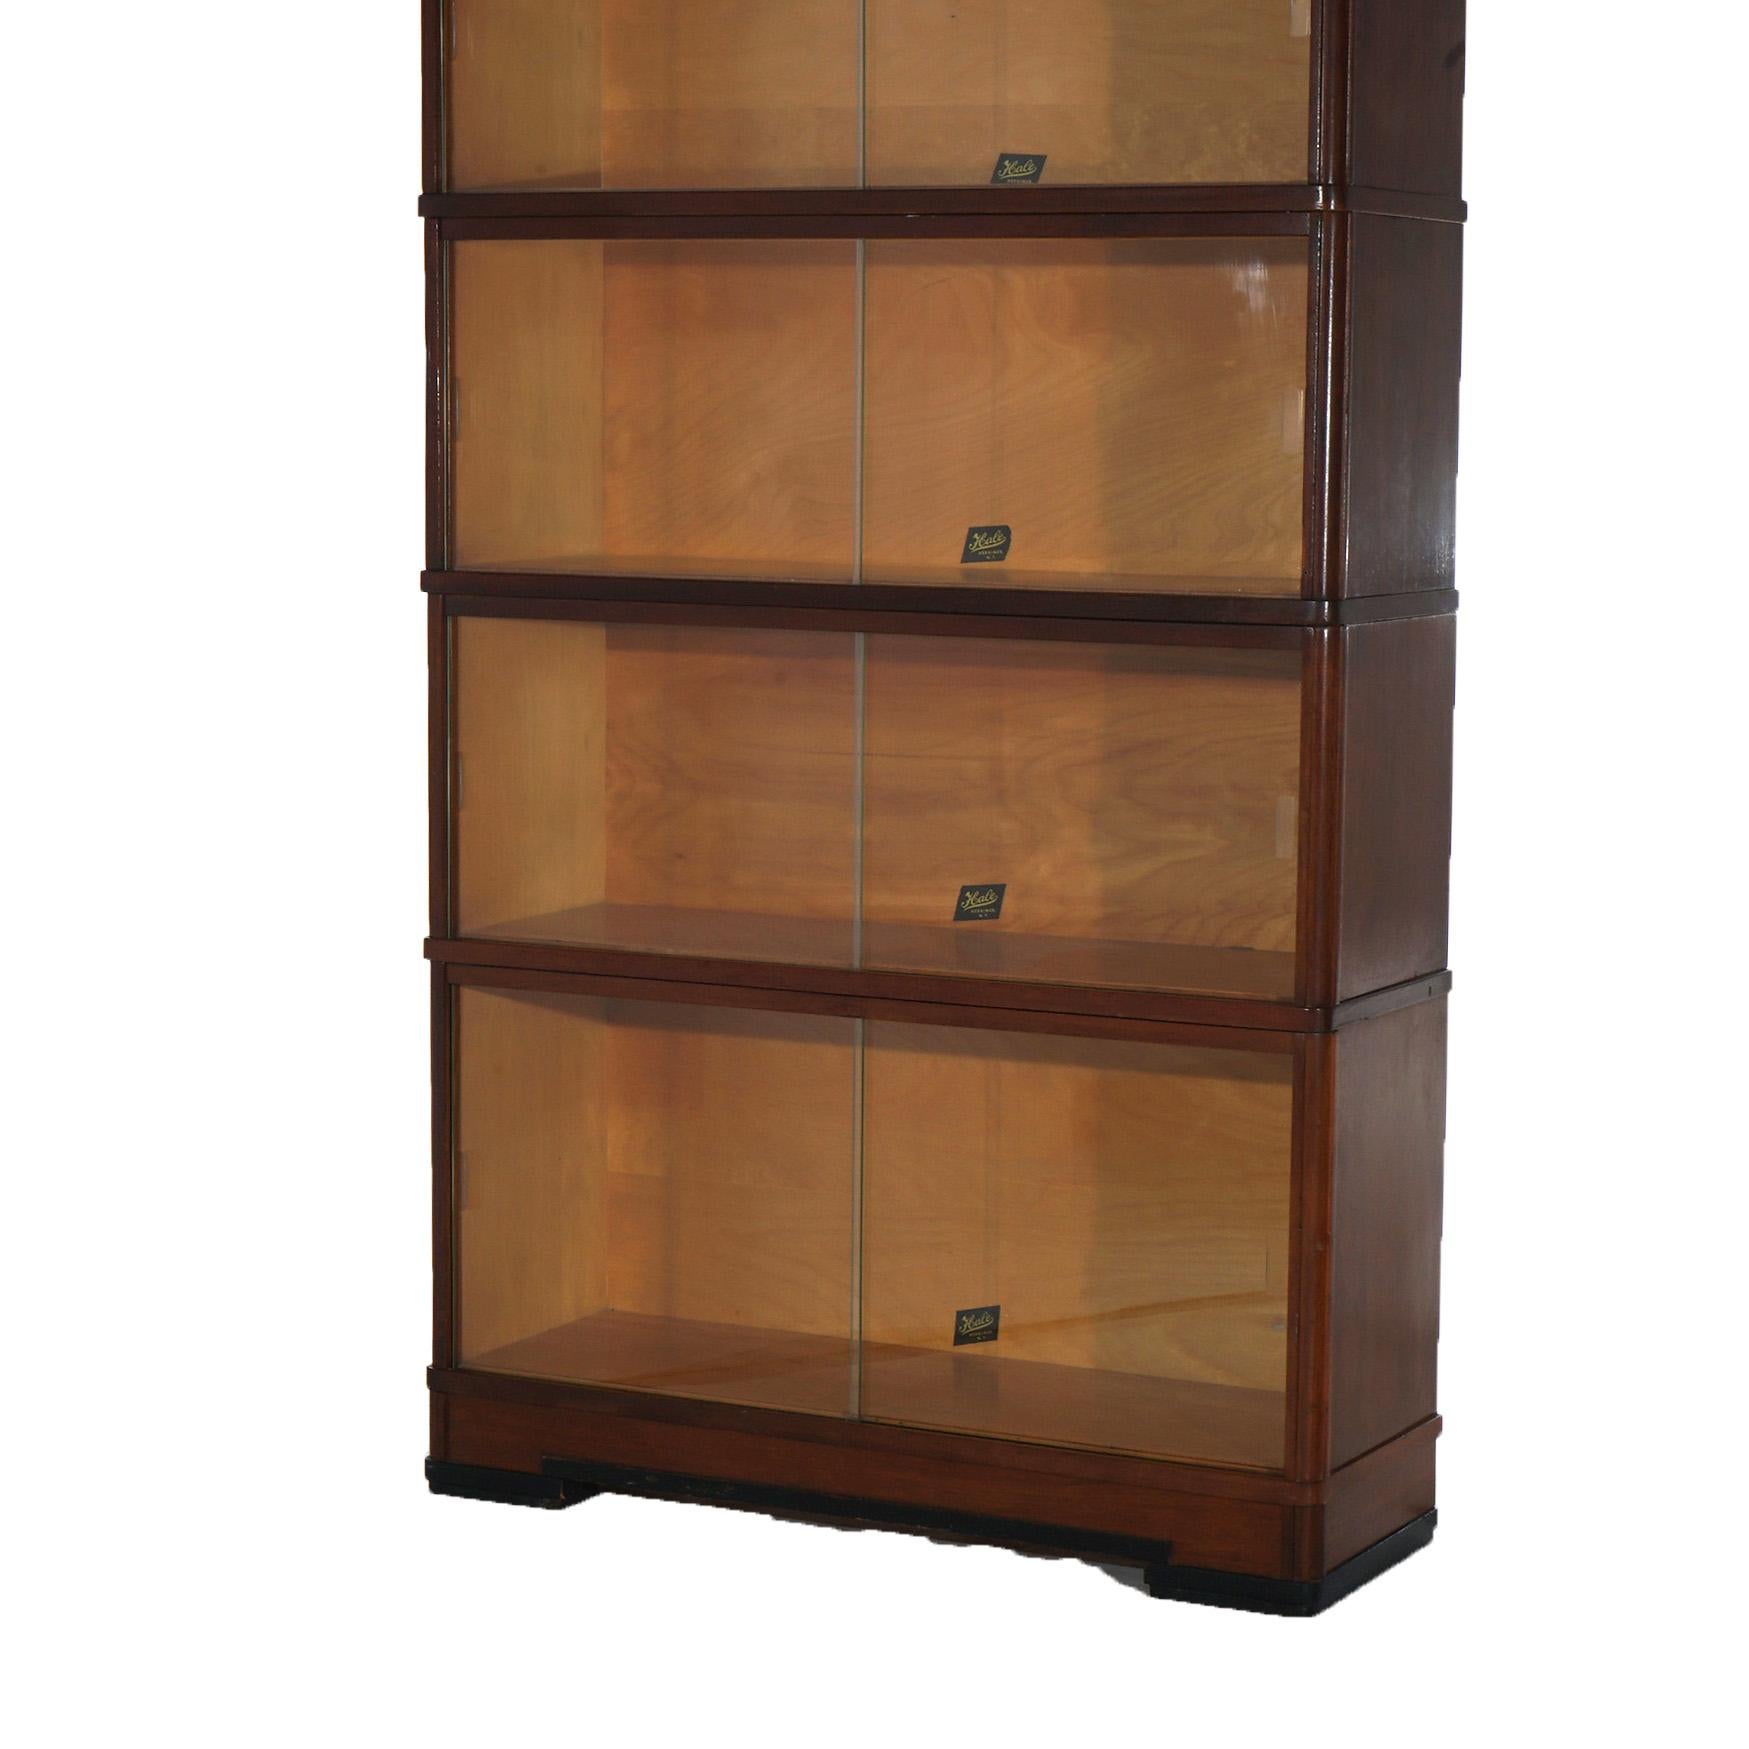 ***Ask About Reduced In-House Delivery Rates - Reliable Professional Service & Fully Insured***
An antique Art Deco barrister bookcase by Hale offers mahogany construction with four stacks, each having pullout glass doors, maker label as